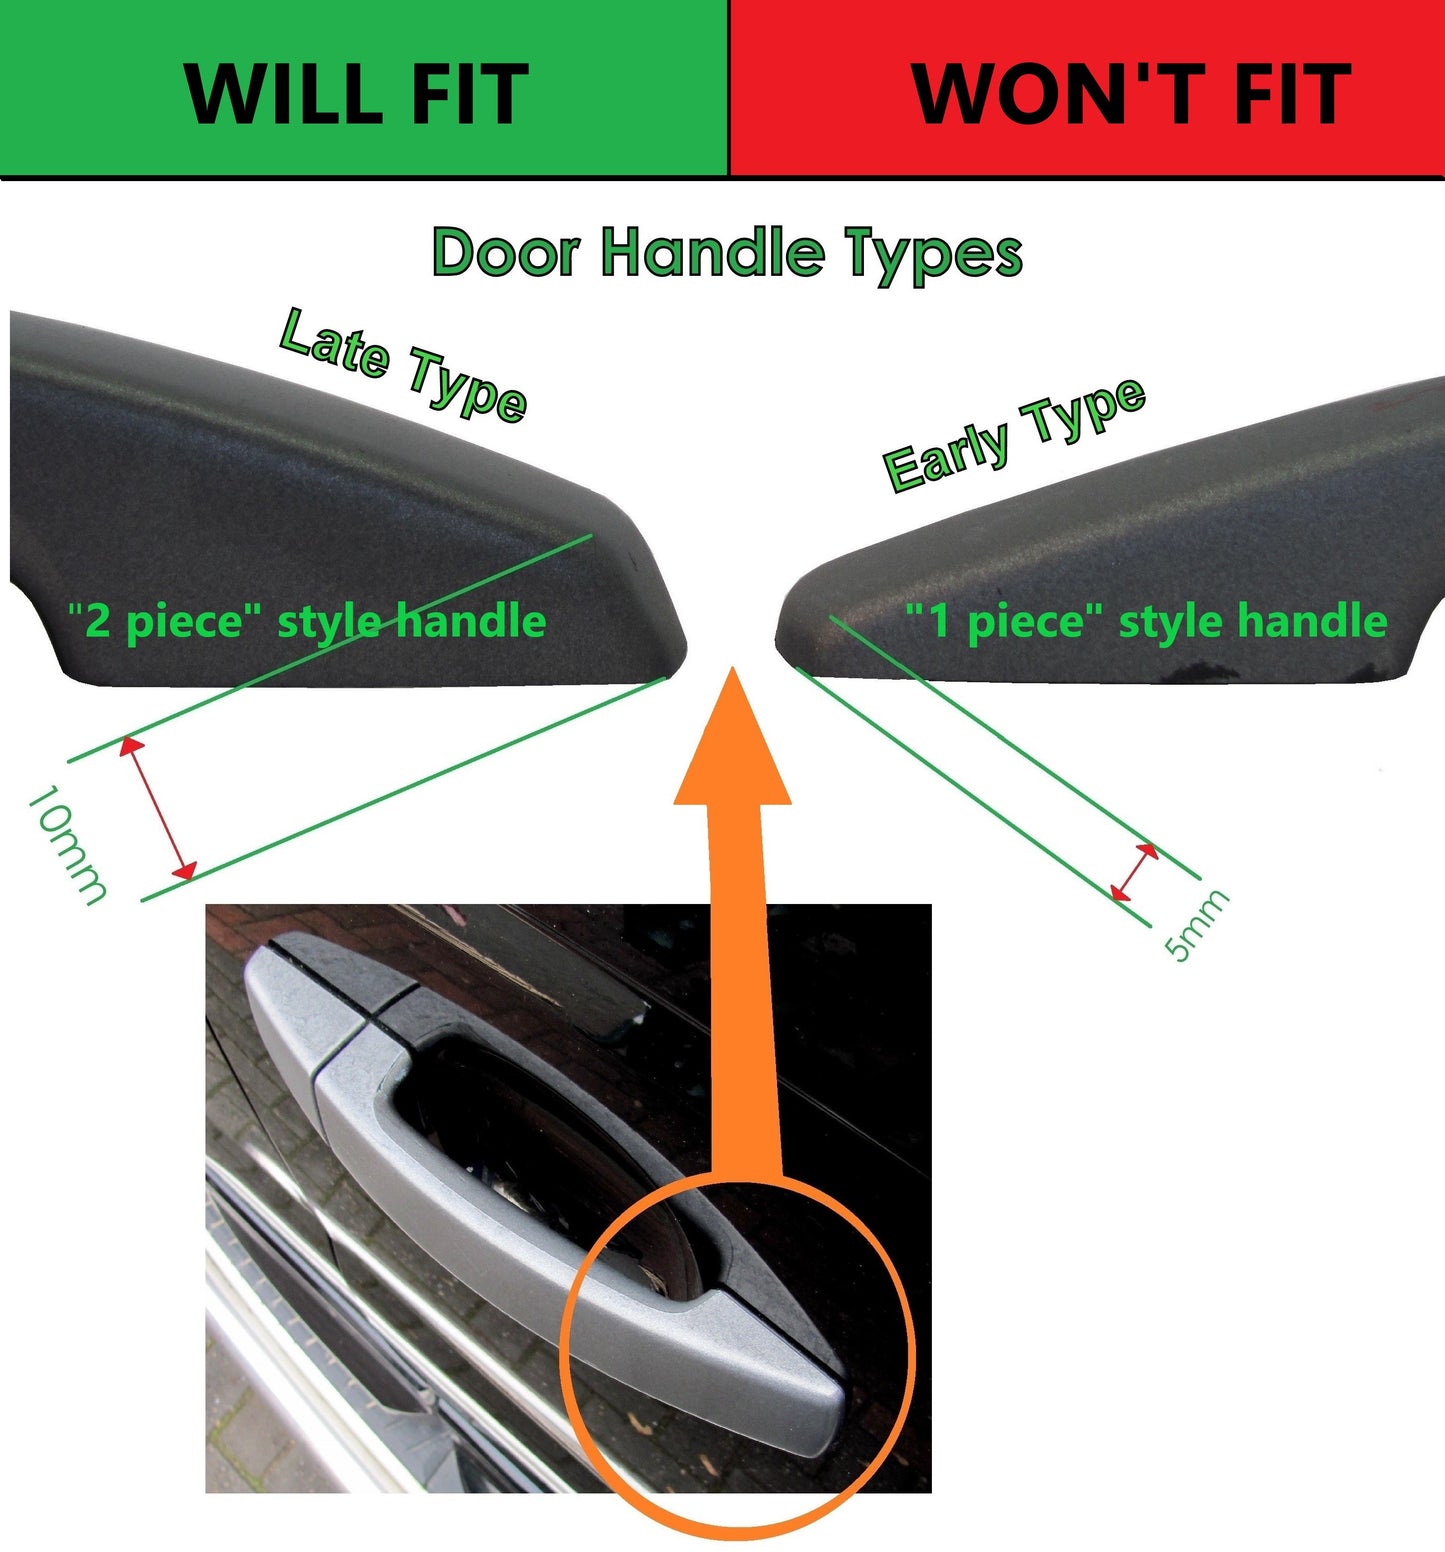 Door Handle "Skins" for Land Rover Freelander 2 fitted with 2 pc Handle - Gloss Black